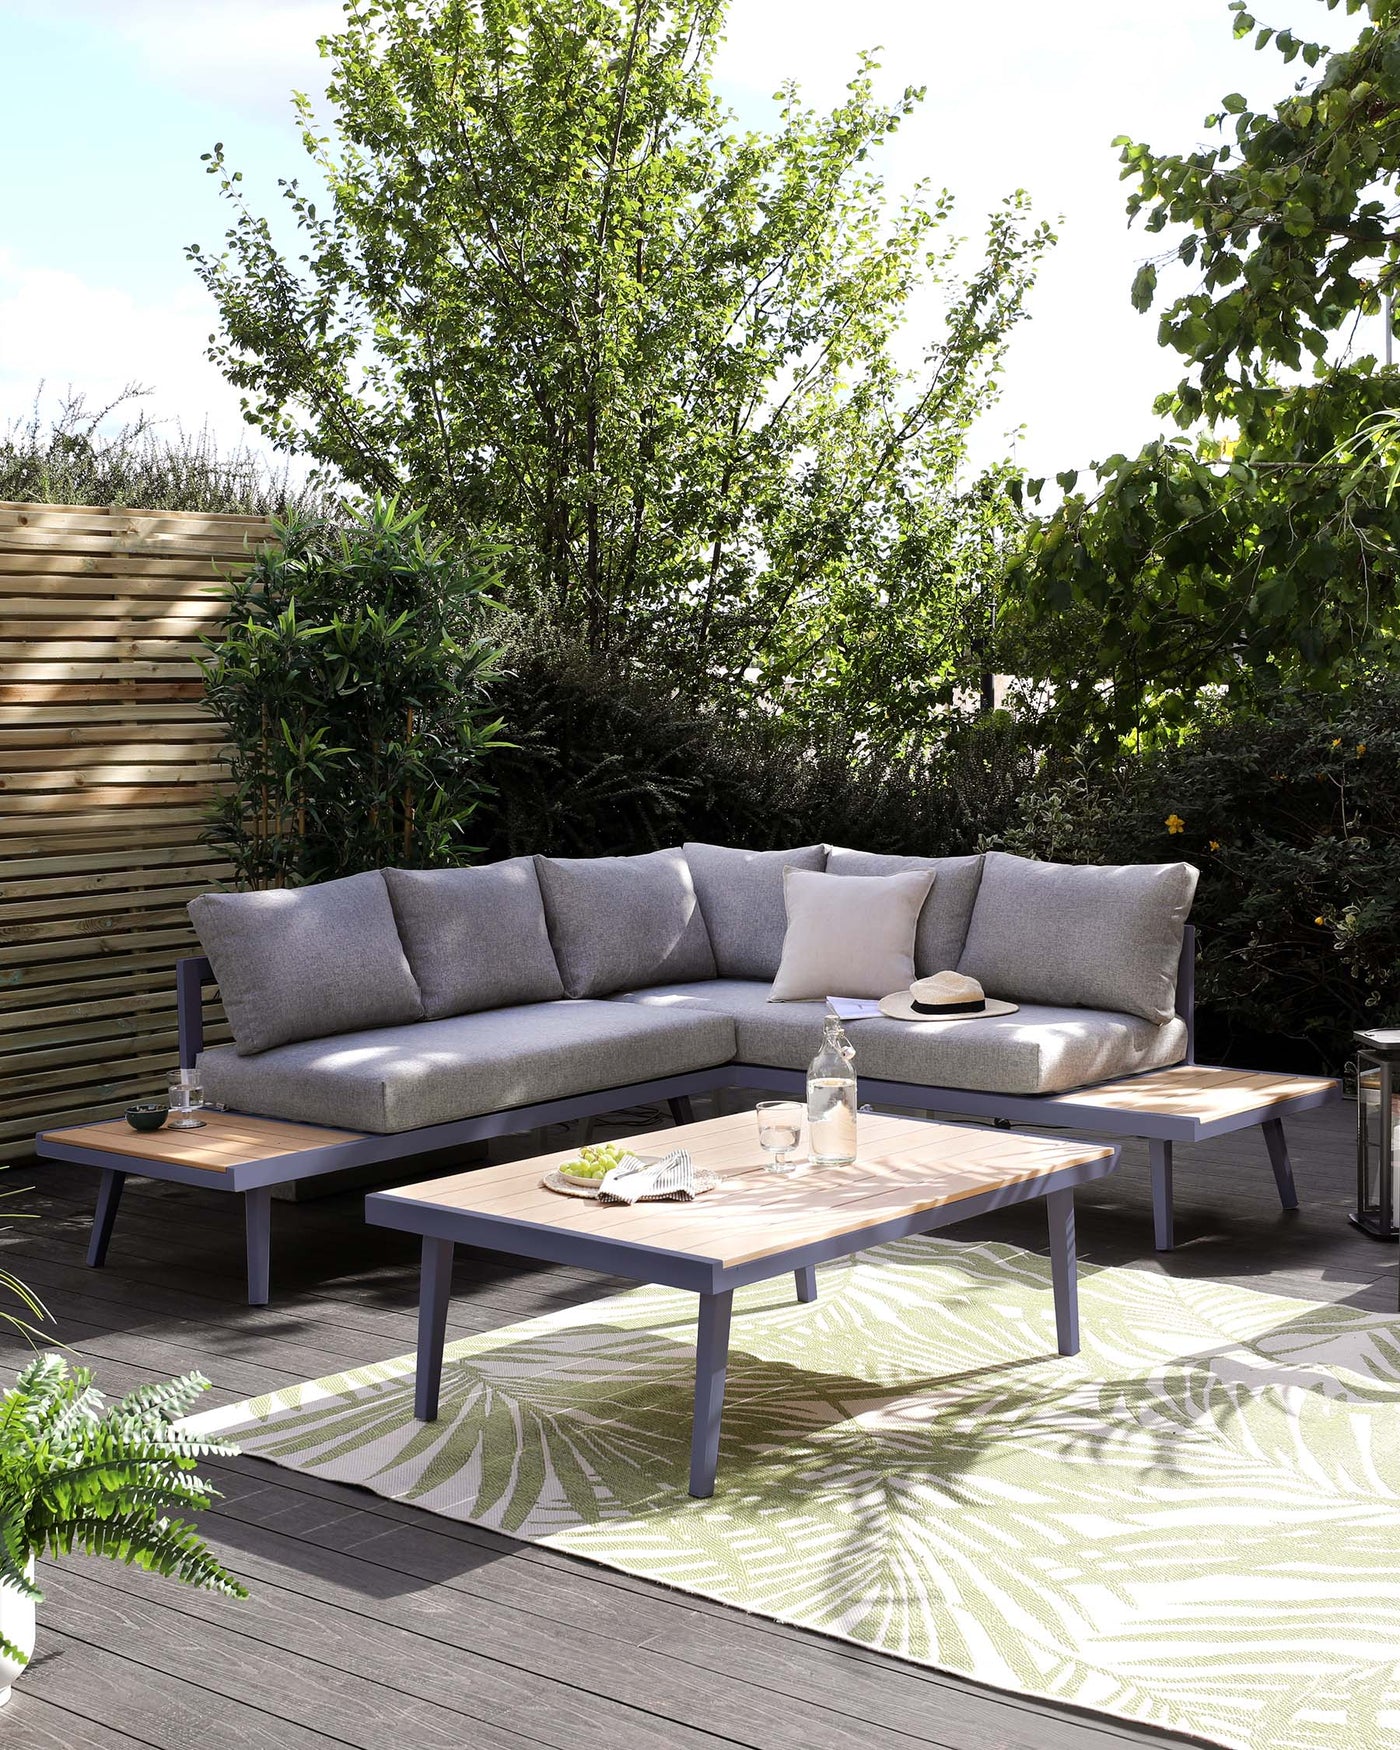 Modern outdoor sectional sofa set with grey cushions on a wooden frame, accompanied by two matching wooden coffee tables with grey legs, staged on an open patio surrounded by lush greenery.